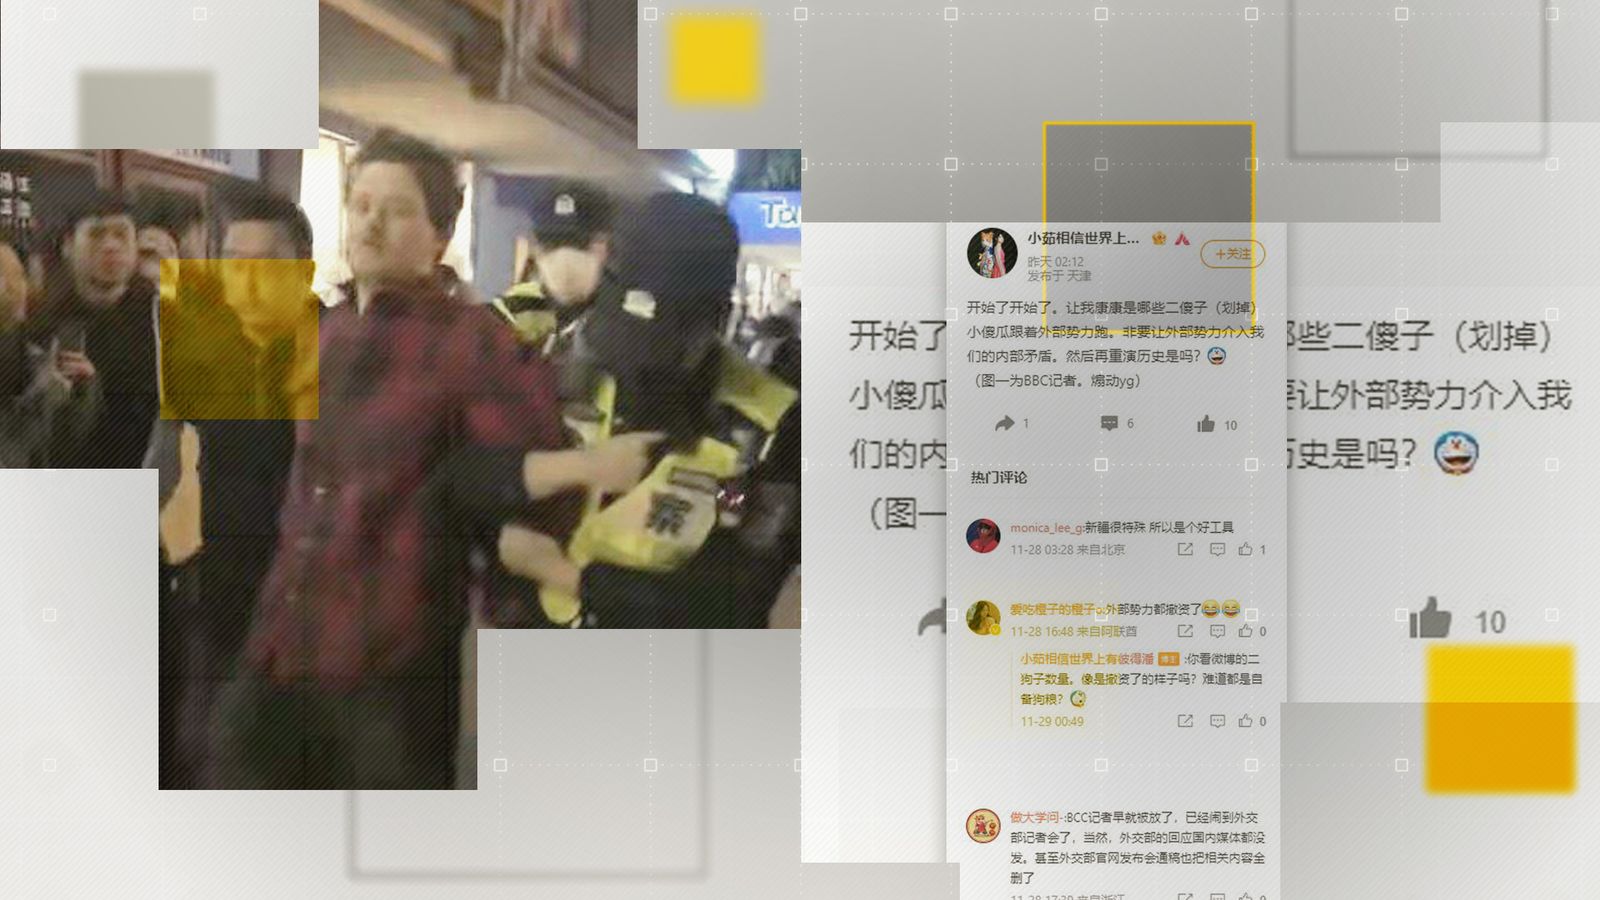 This is what Chinese social media users have been seeing as protests spread across the country 